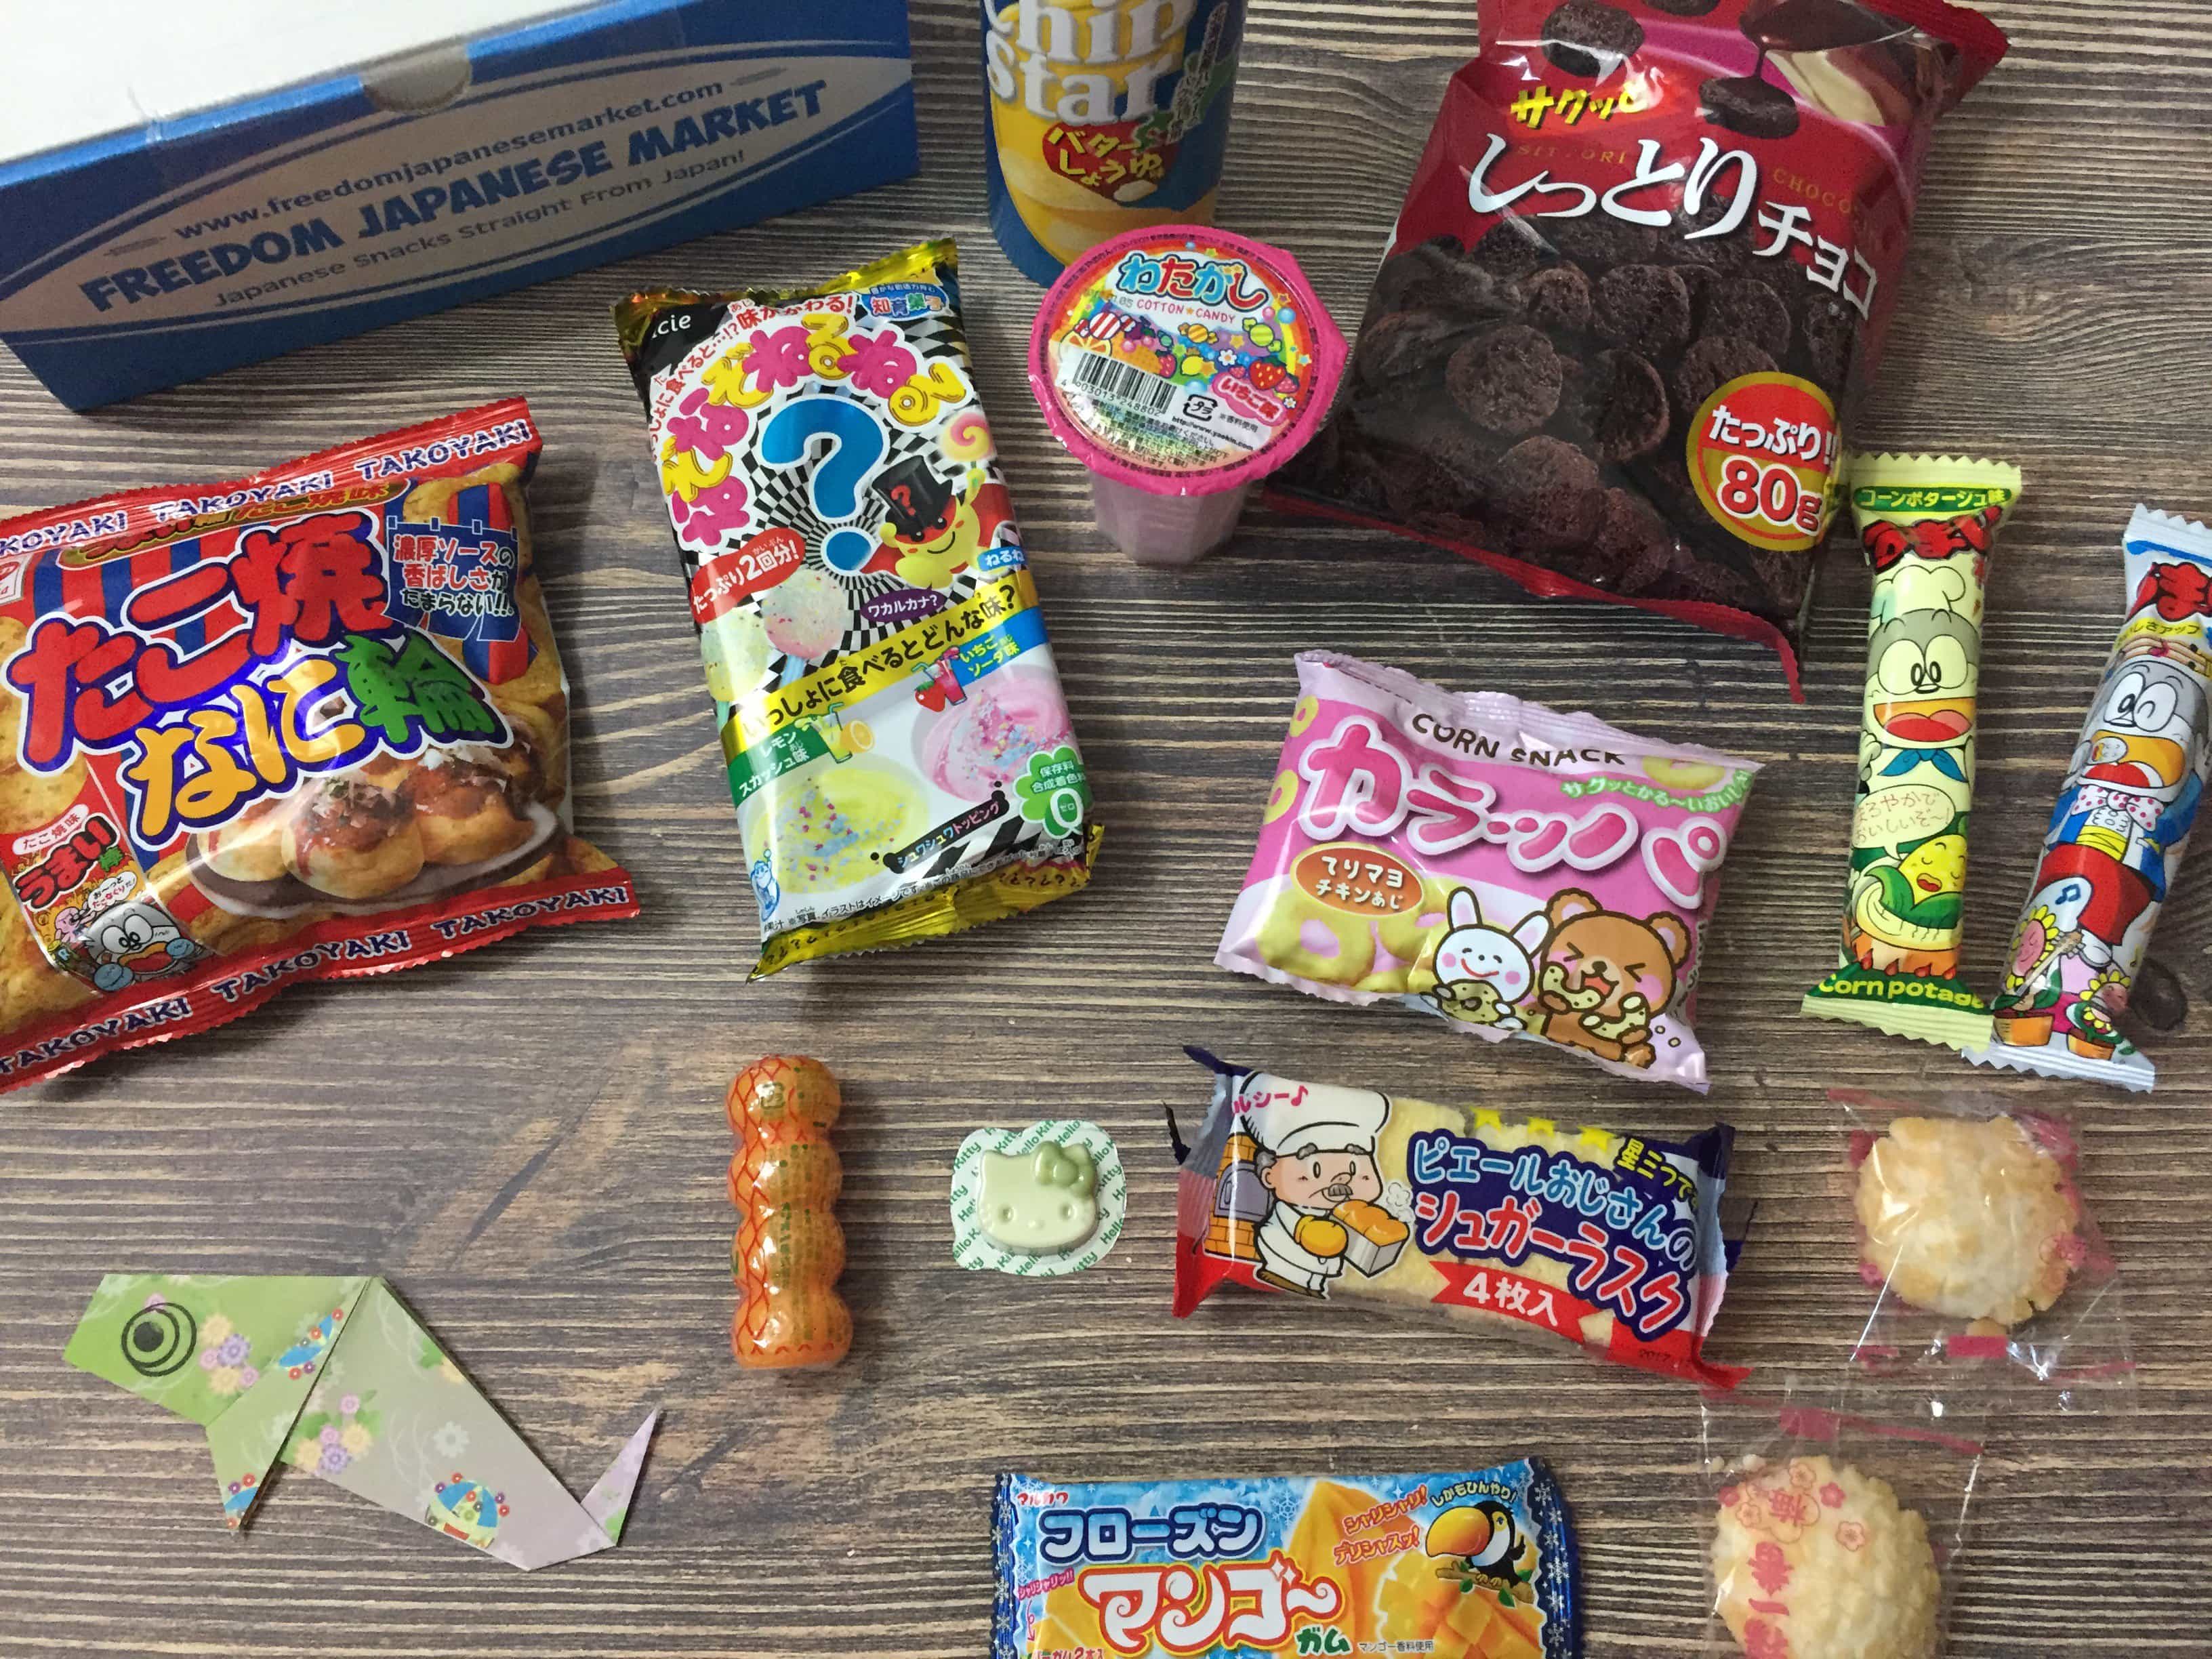 Freedom Japanese Market May 2017 Subscription Box Review - Hello  Subscription